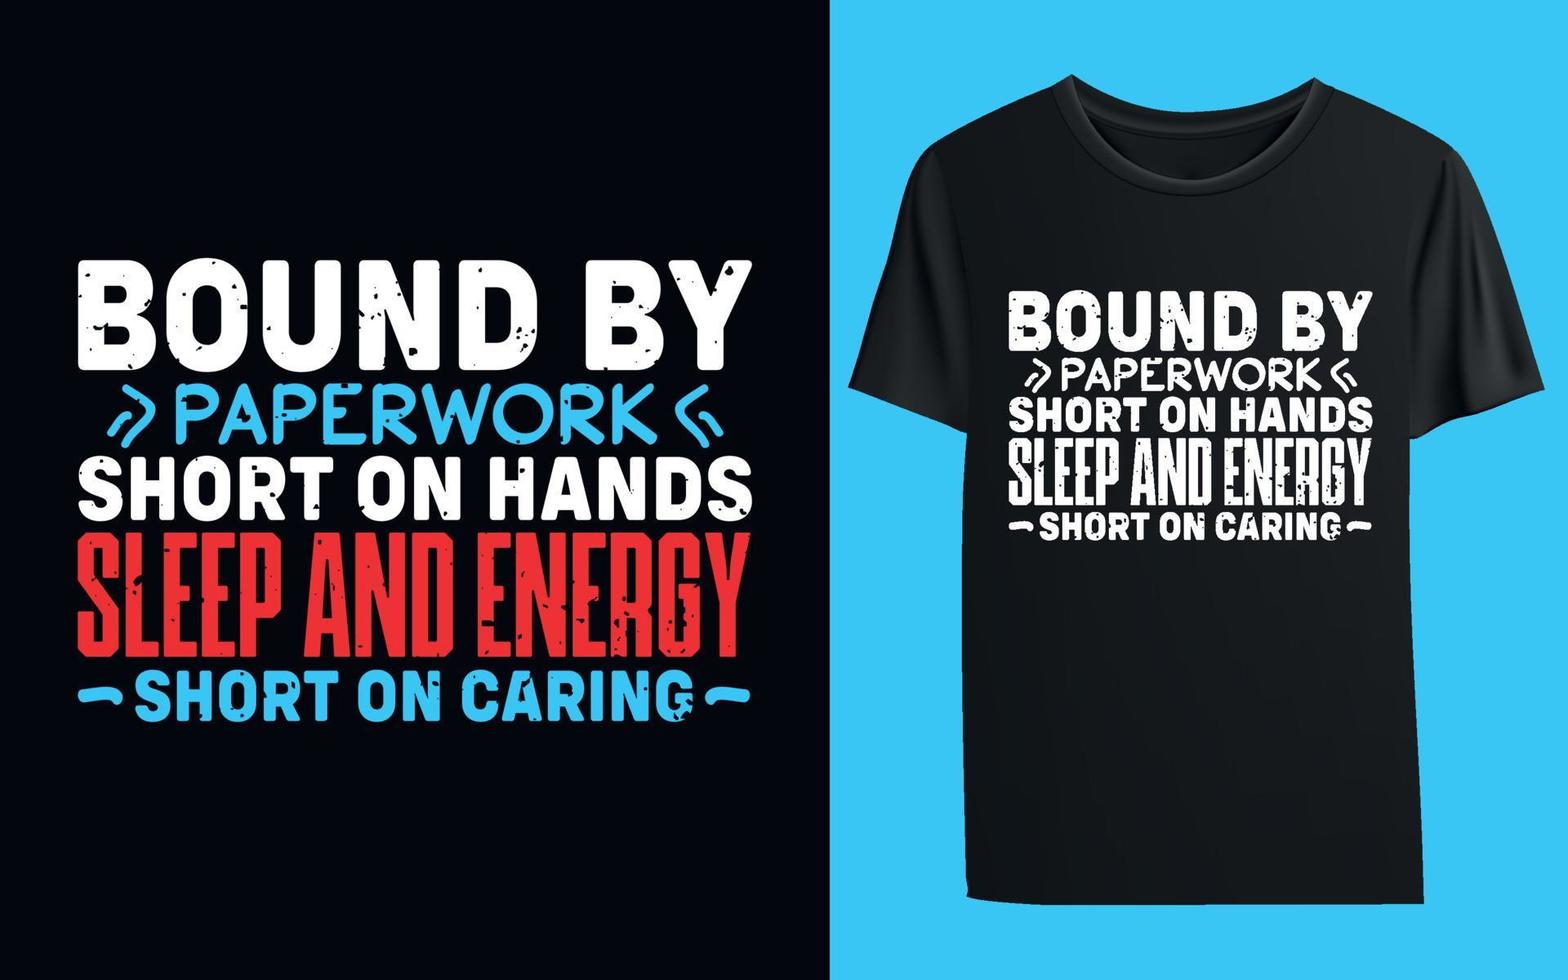 Bound By Paperwork Short On Hands Sleep And Energy Nurses Are Rarely Short On Caring. Typography T- Shirt Design vector